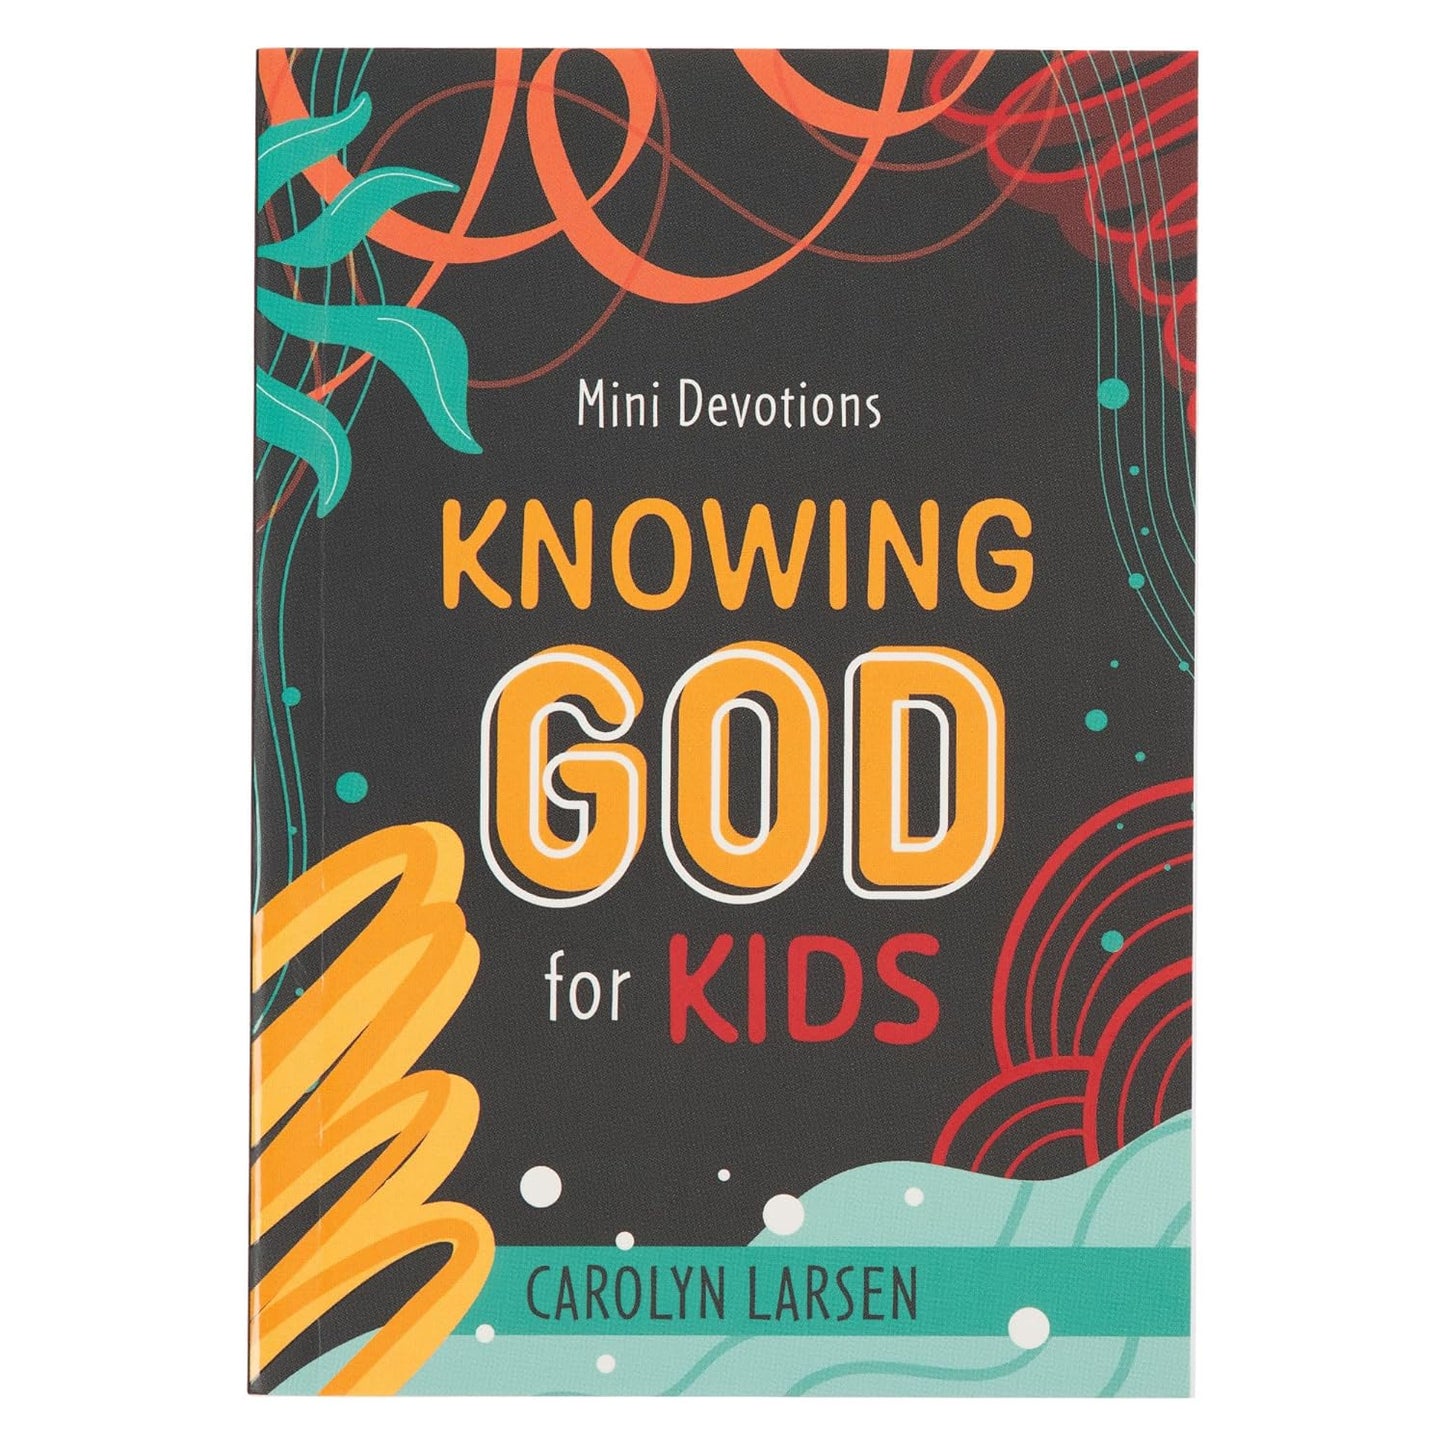 Knowing God for Kids Christian Mini Devotion Activities claimedbygoddesigns